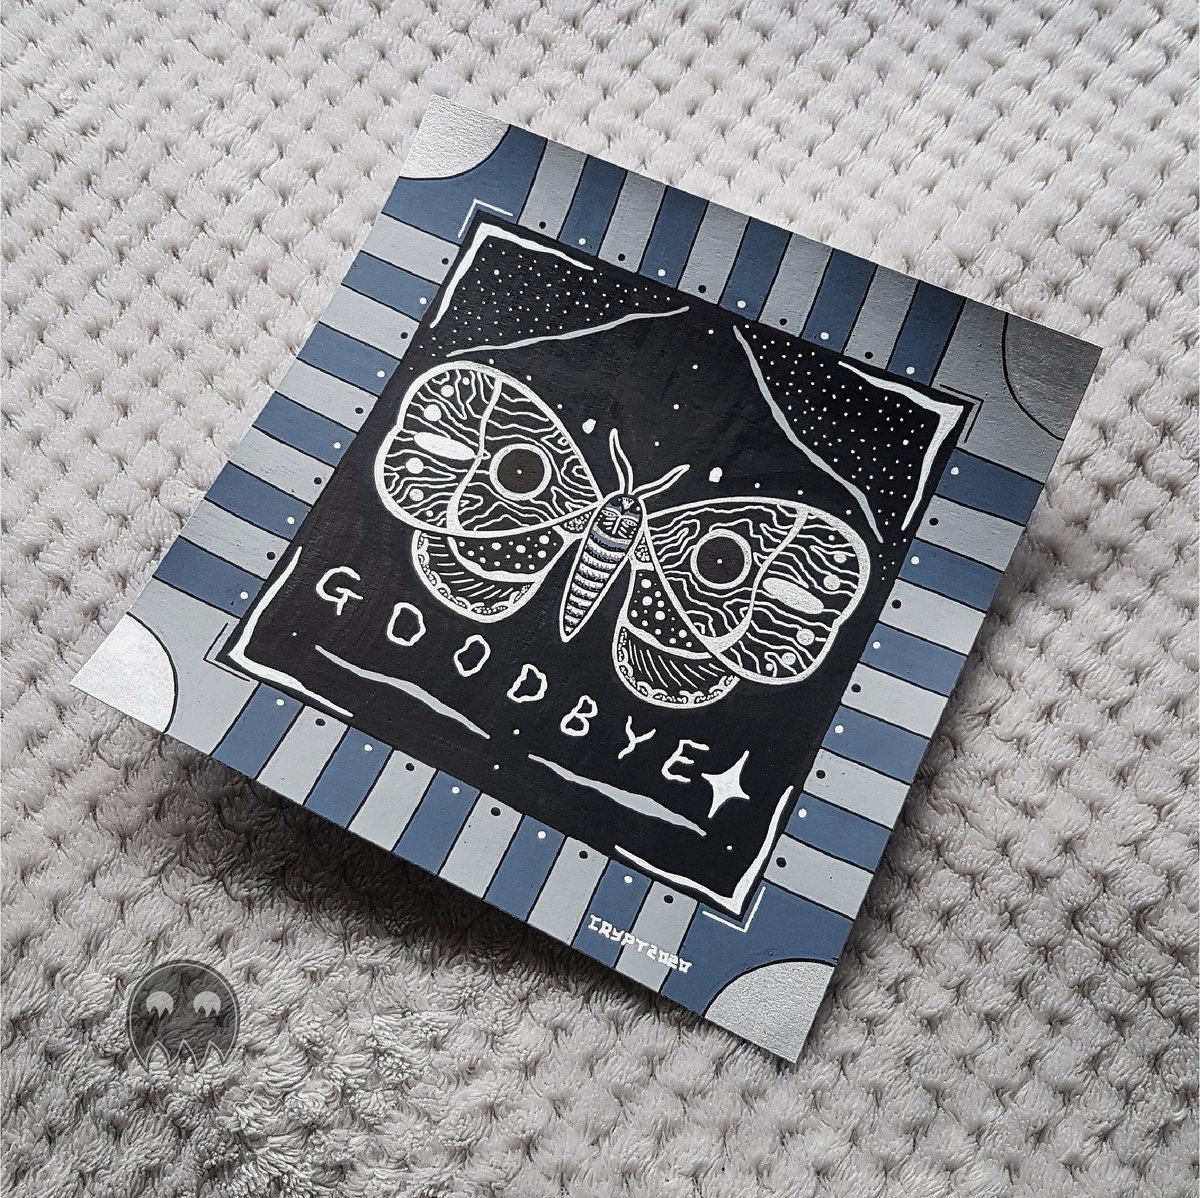 ouija moth, 8x8 inches. posca markers on cass art heavyweight cartridge paperthis one was silver and white on black but the silver doesn't show too well in the picture